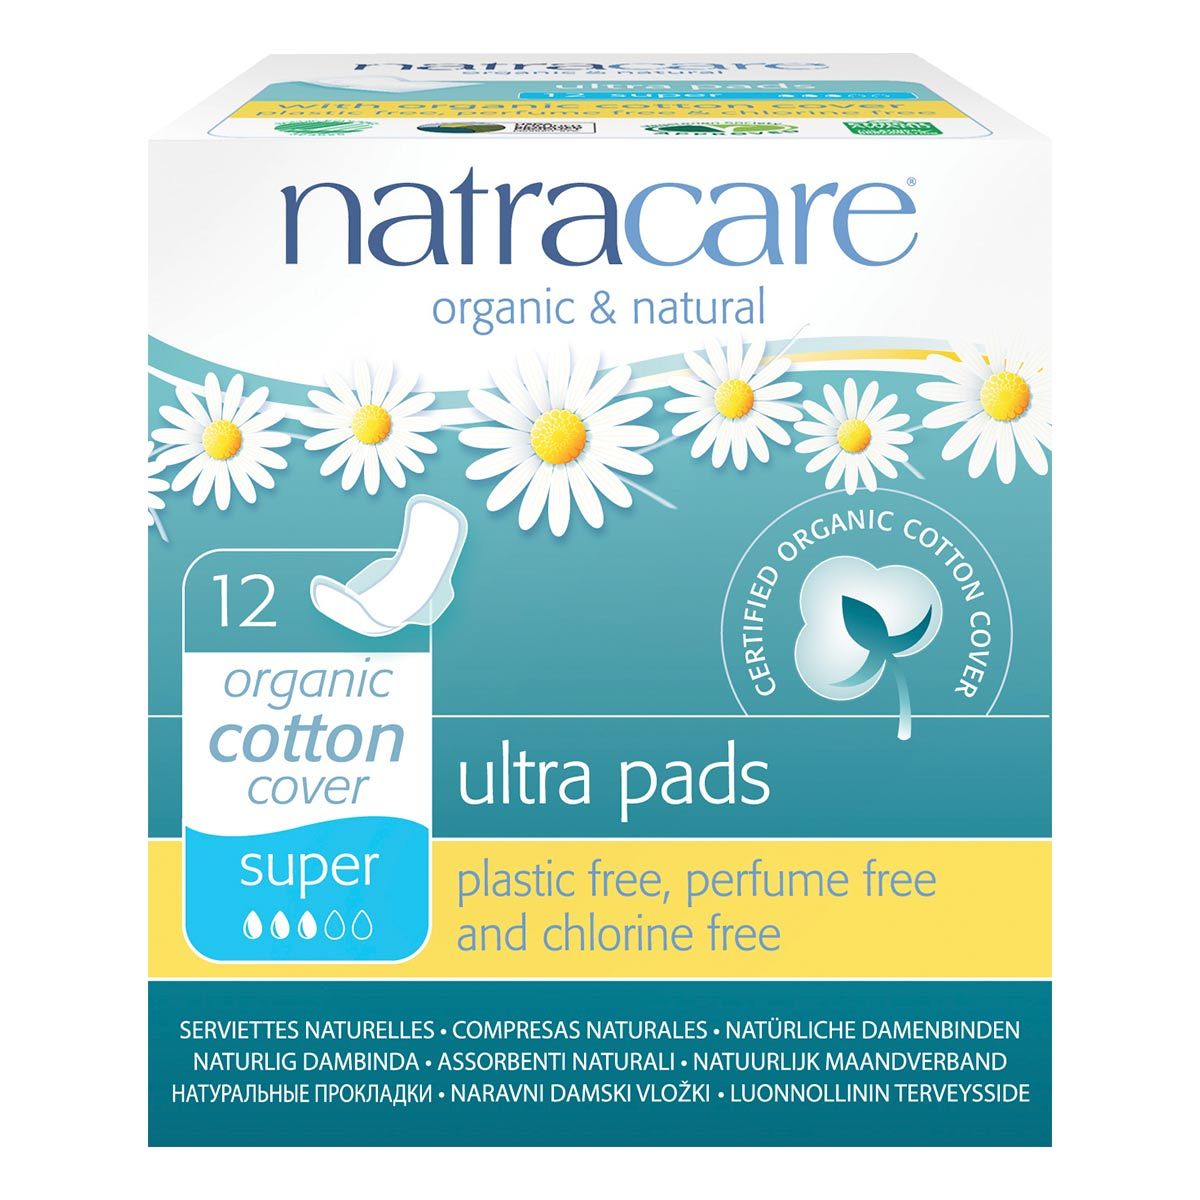 Primary image of Super Organic Cotton Ultra Pads